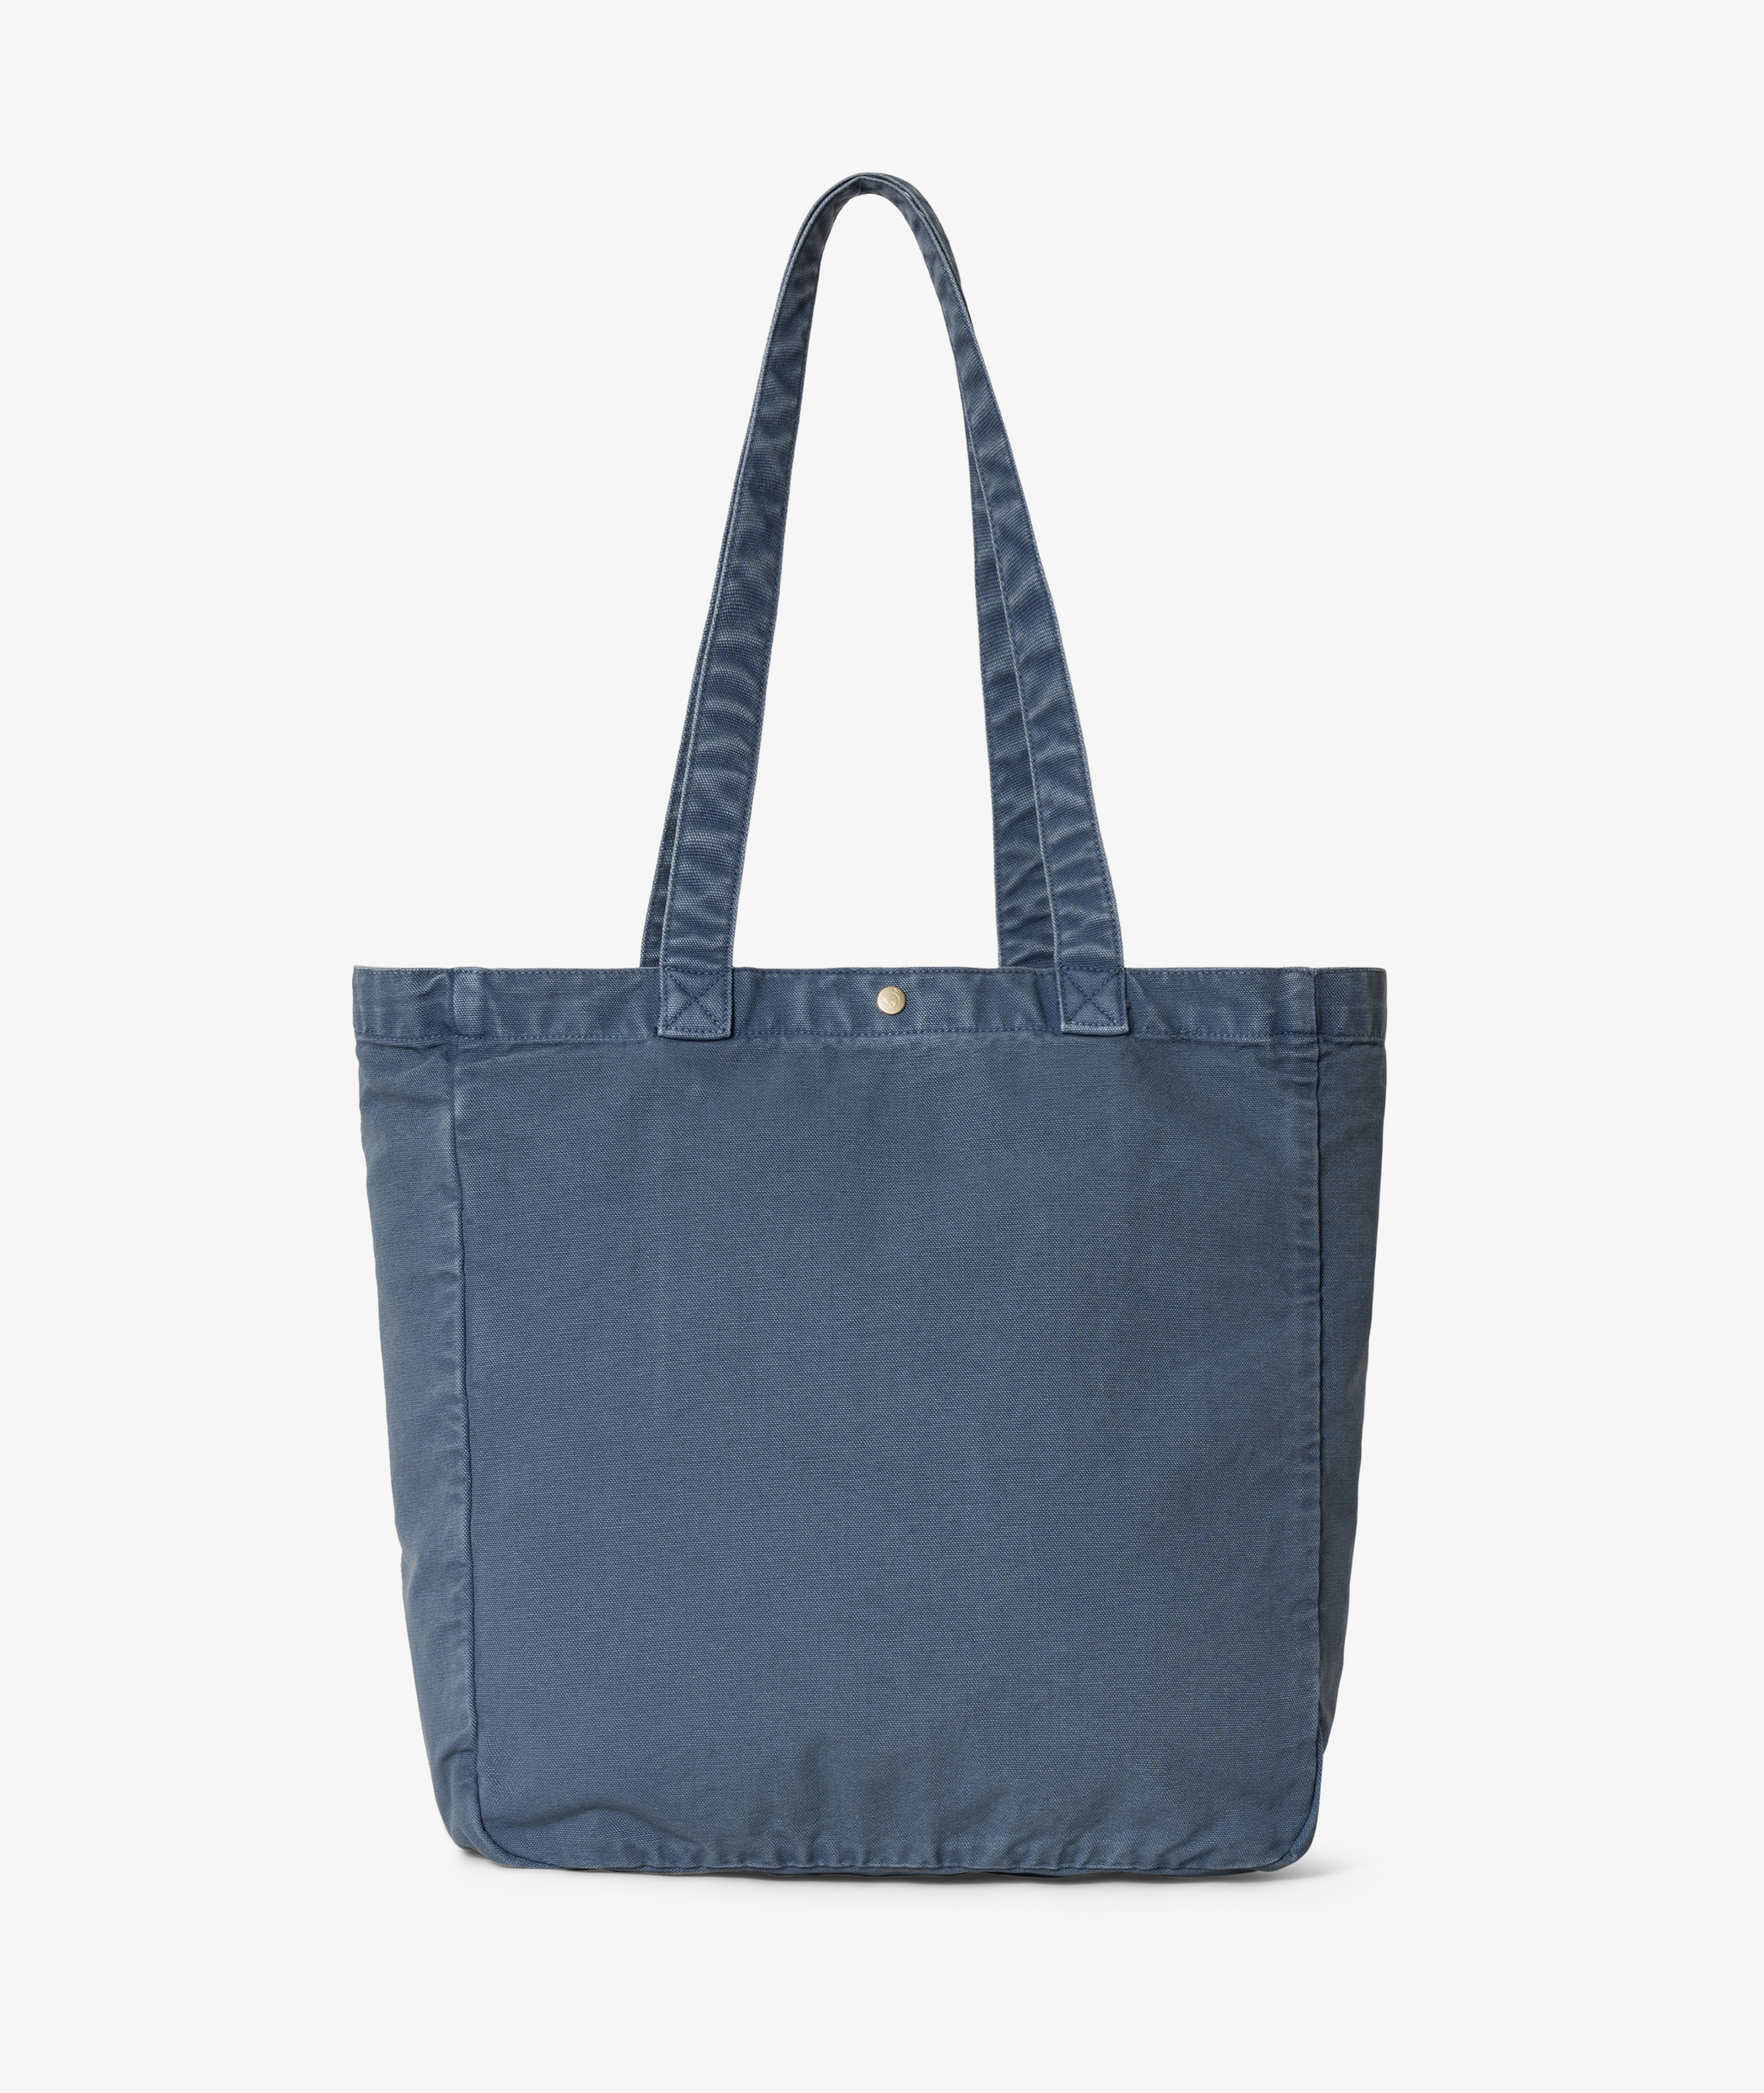 Norse Store | Shipping Worldwide - Carhartt WIP Bayfield Tote - Storm Blue